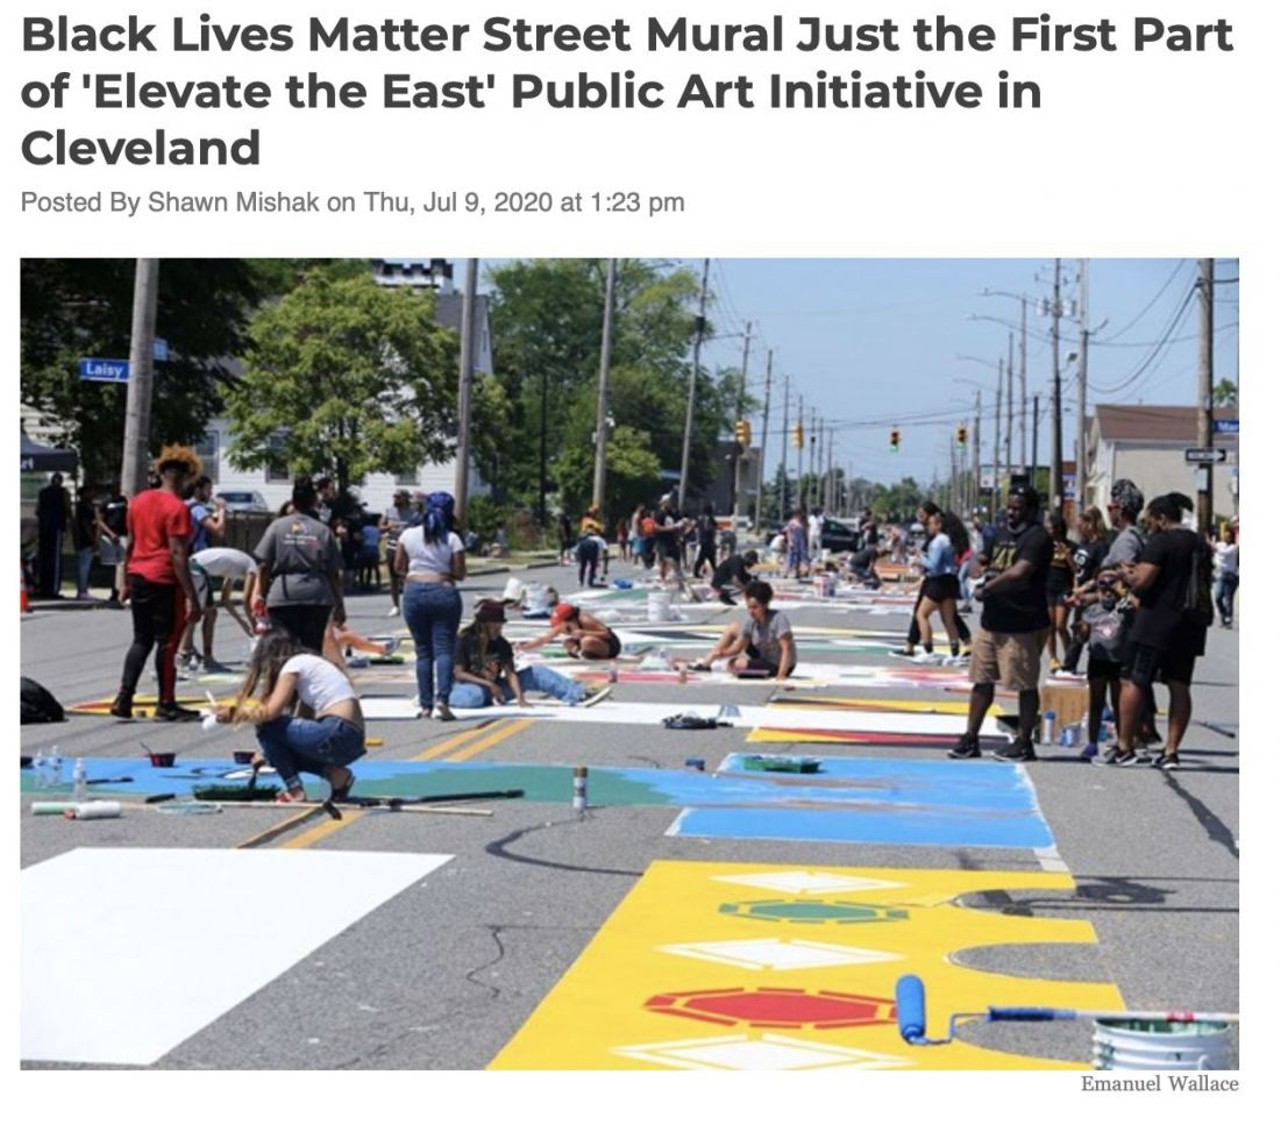  &#147;Black Lives Matter Street Mural Just the First Part of 'Elevate the East' Public Art Initiative in Cleveland&#148;
July 9th
&#147;The Black Lives Matter street mural recently painted on E. 93rd, the letters of which were designated to individual artists and students to decorate, could not have offered a timelier kickoff to "Elevate the East," a new public art initiative in Wards 4, 5 and 6.&#148;
Photo via Scene Archives